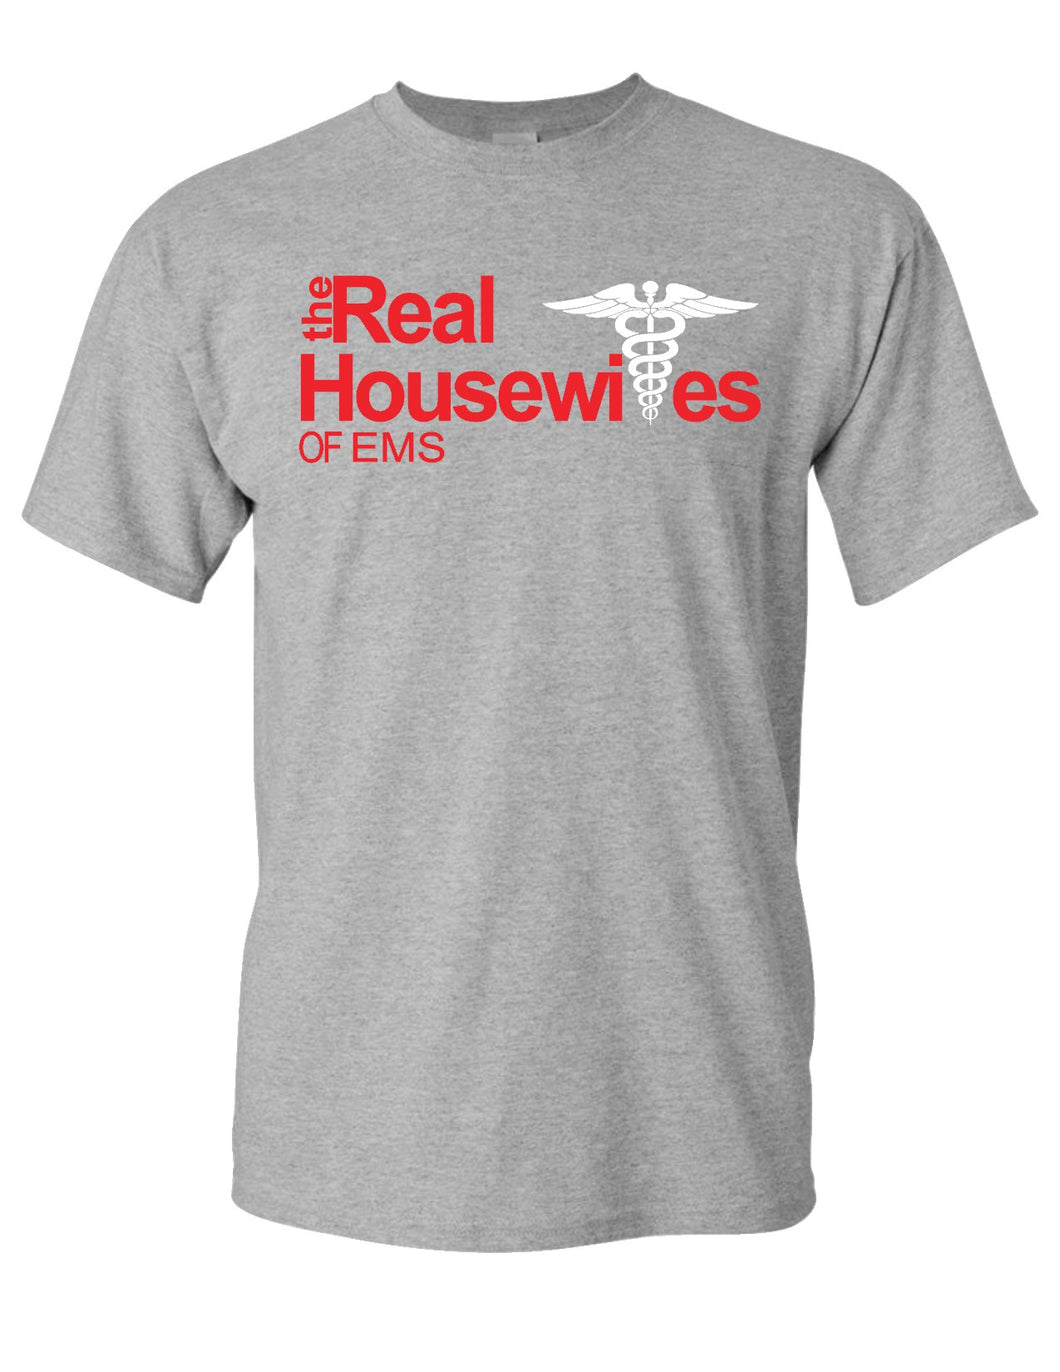 The Real Housewives of the EMS T-Shirt